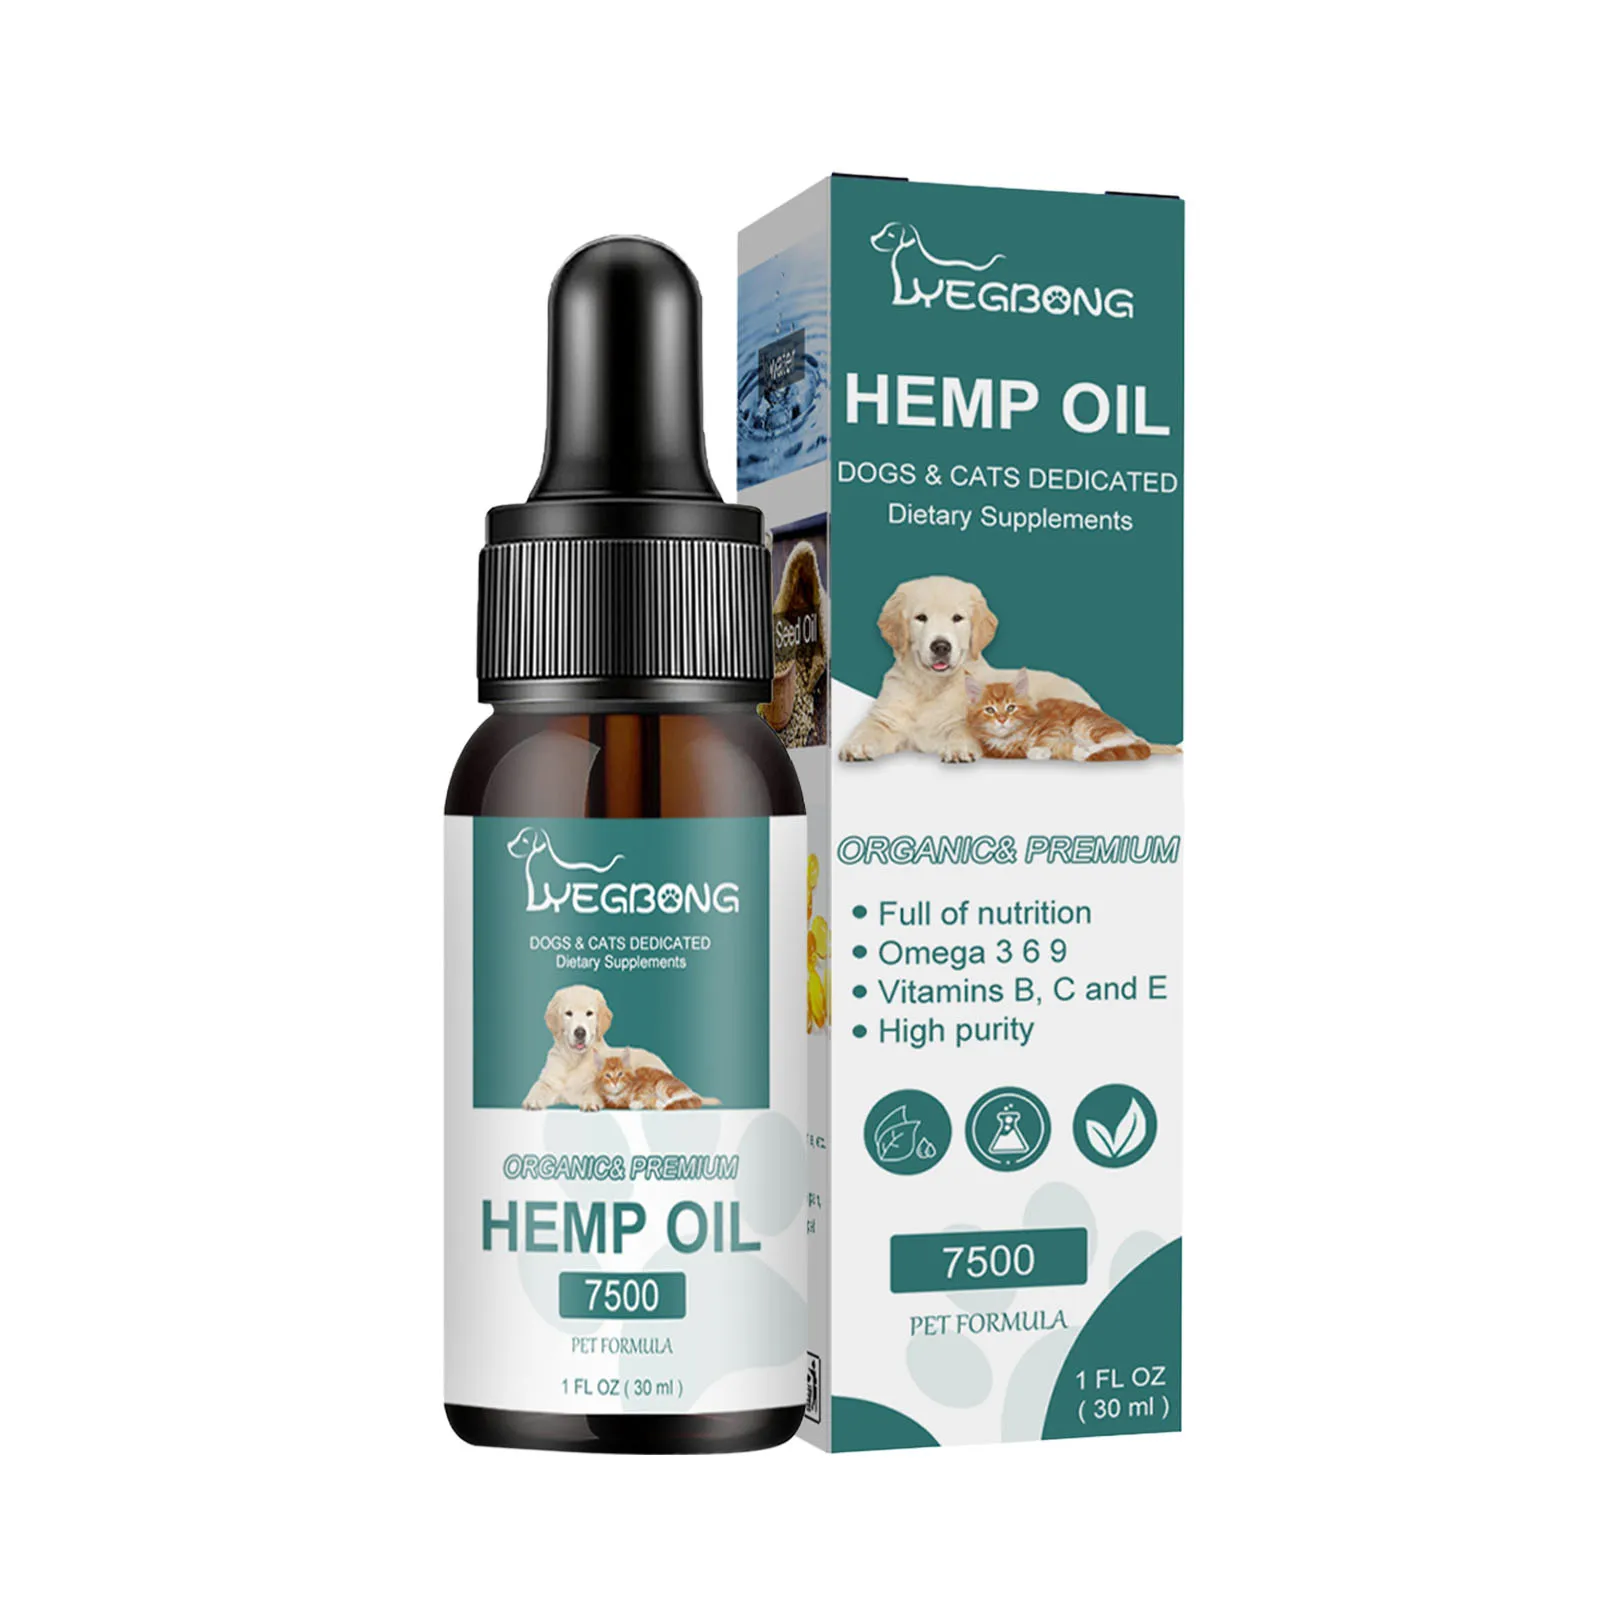 

Hemp Oil For Dogs Cats 30ml Pet Natural Calming Aid Helps With Discomfort Stress Pet Hemp Oil Drops Boost Immunity Keep Hip And